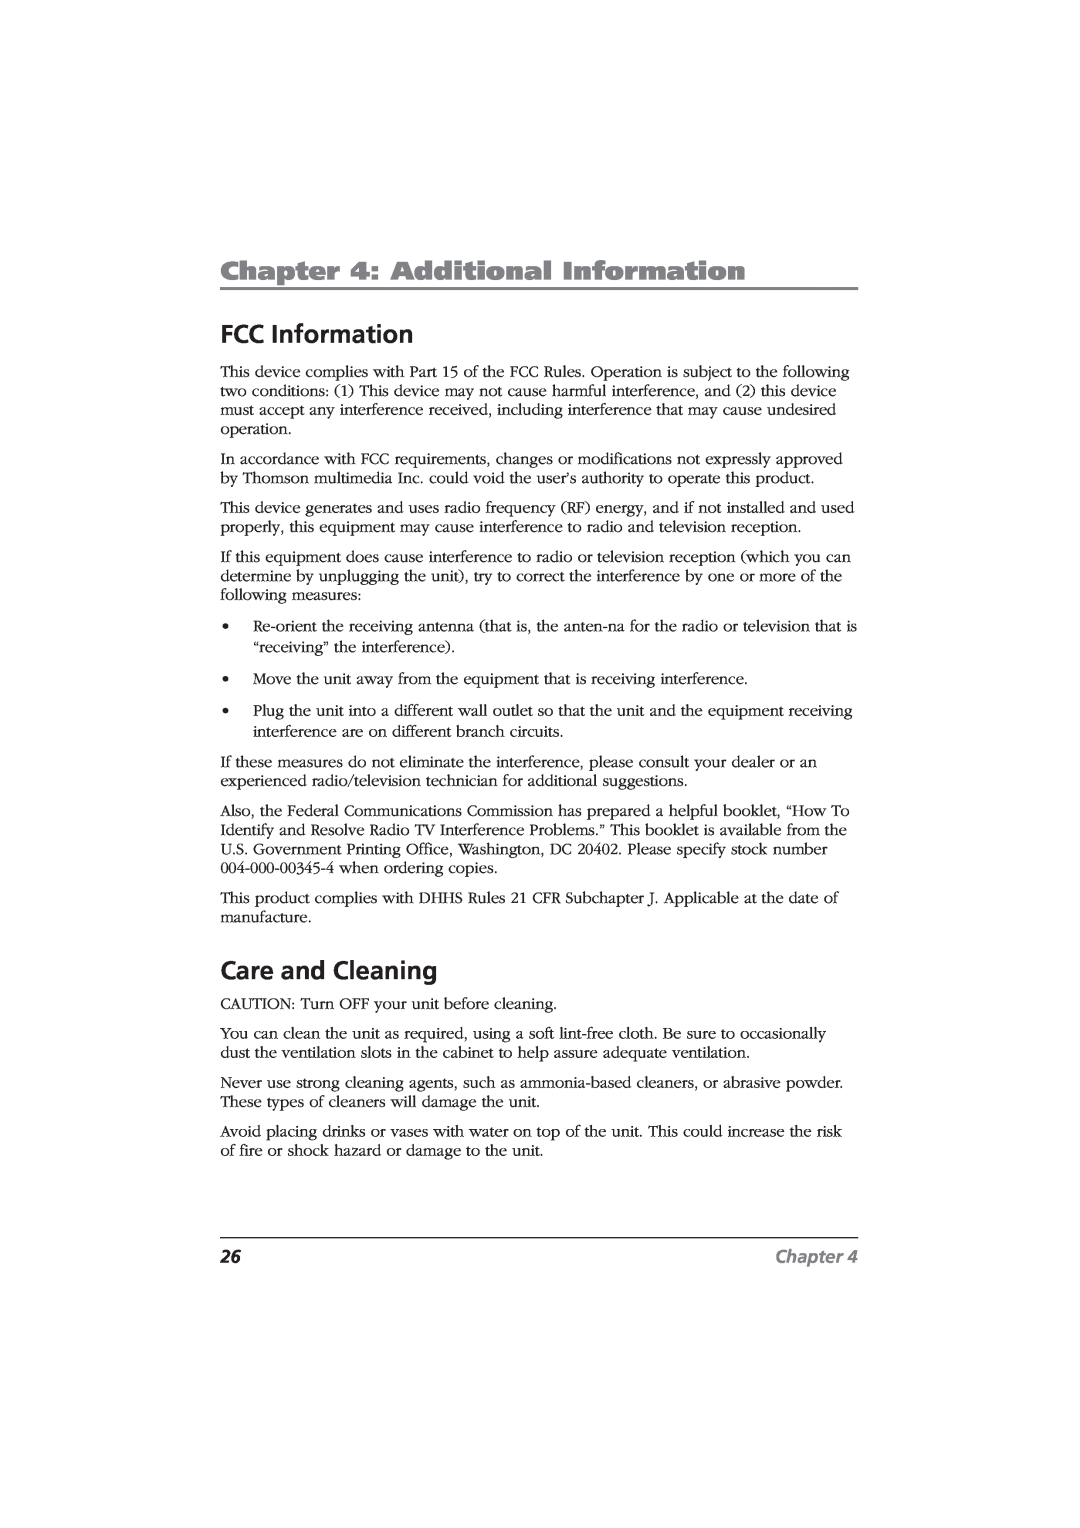 RCA CDRW120 manual FCC Information, Care and Cleaning, Additional Information, Chapter 